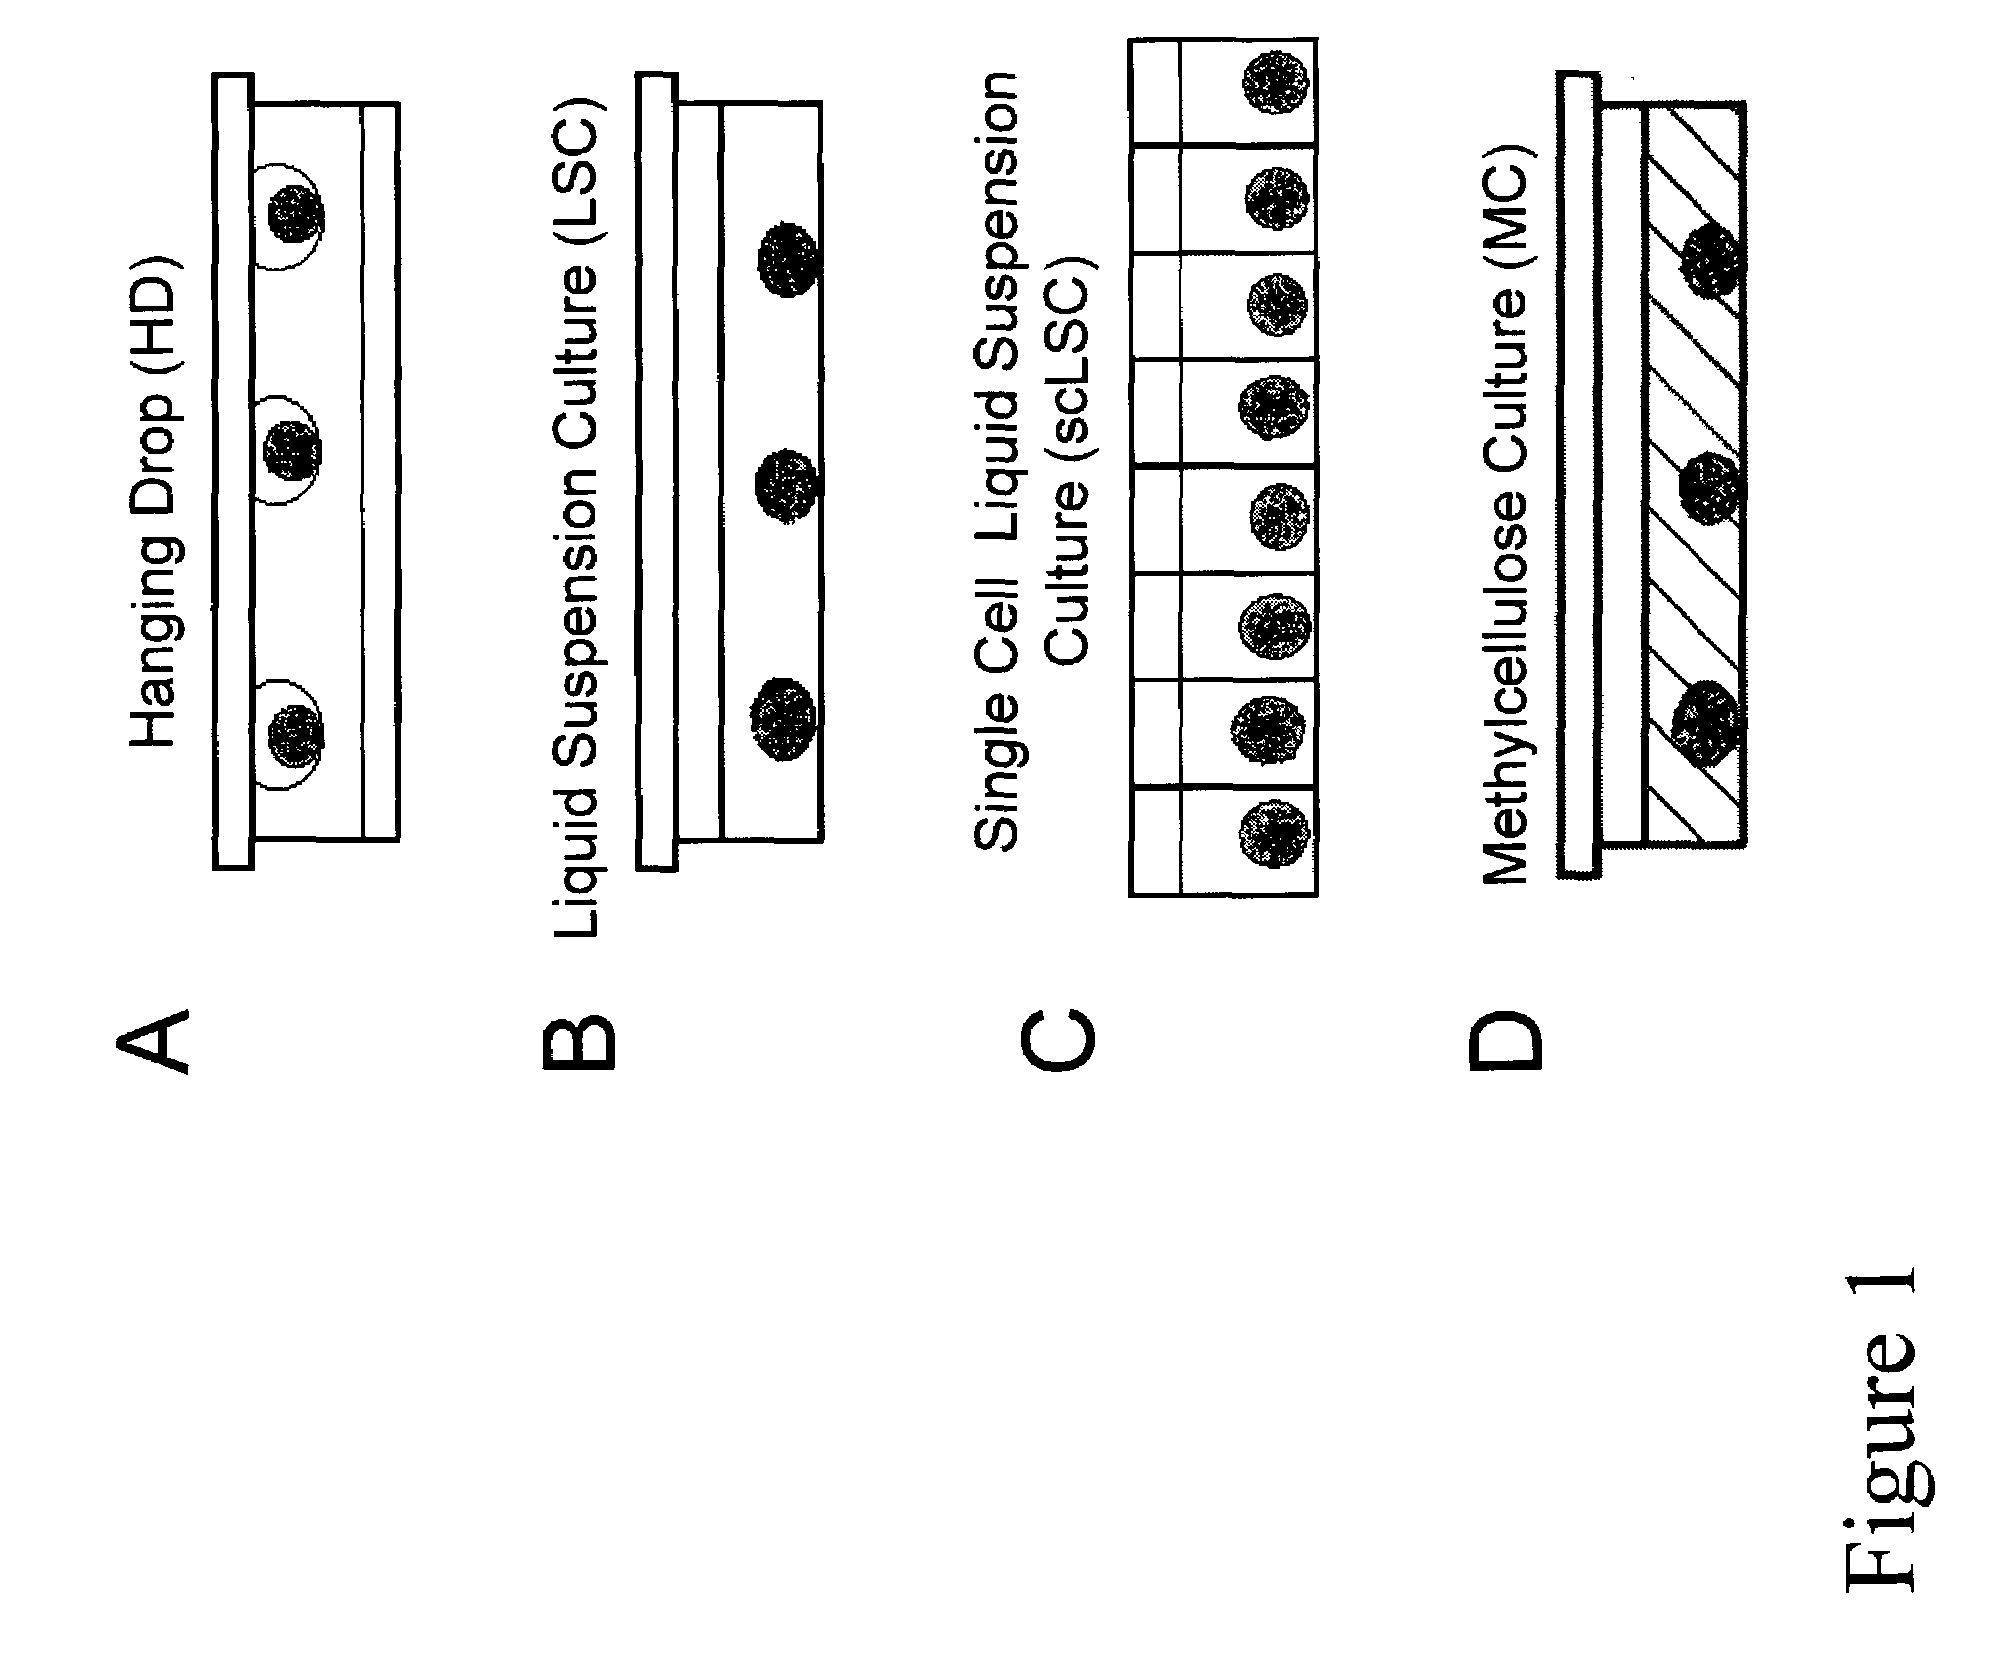 Bioprocess for producing uniform embryoid bodies from embryonic stem cells in a high density bioreactor